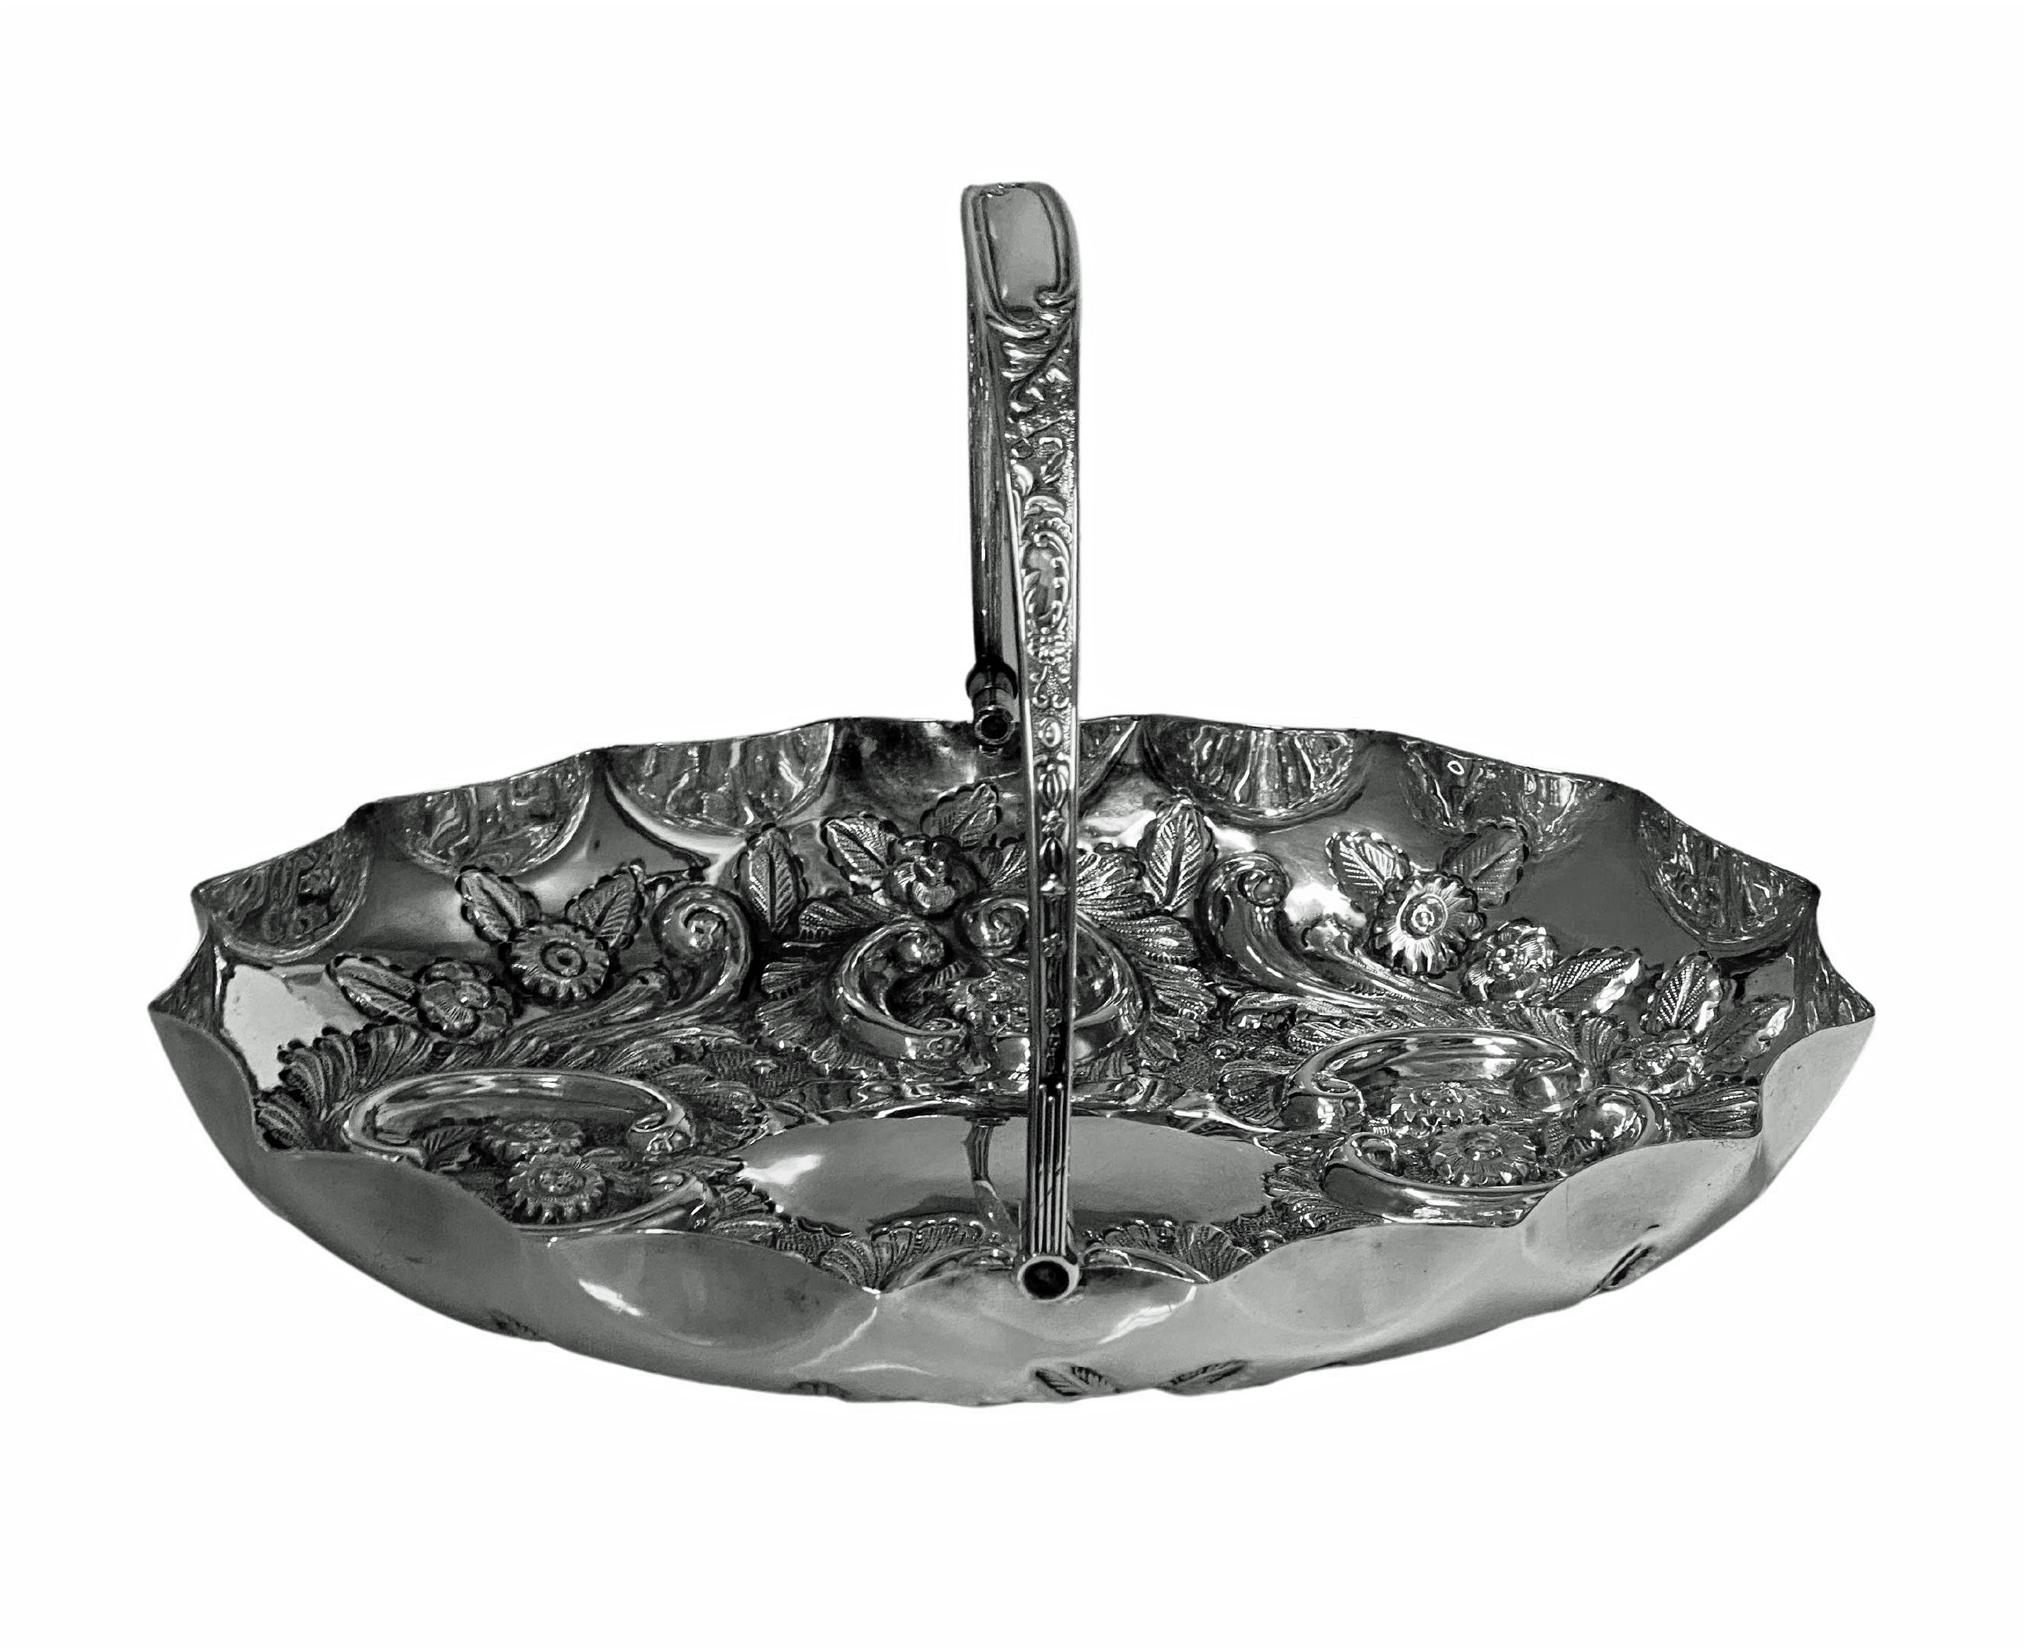 Early 20th Century Antique English Sterling Silver Fruit Basket Birmingham 1902 For Sale